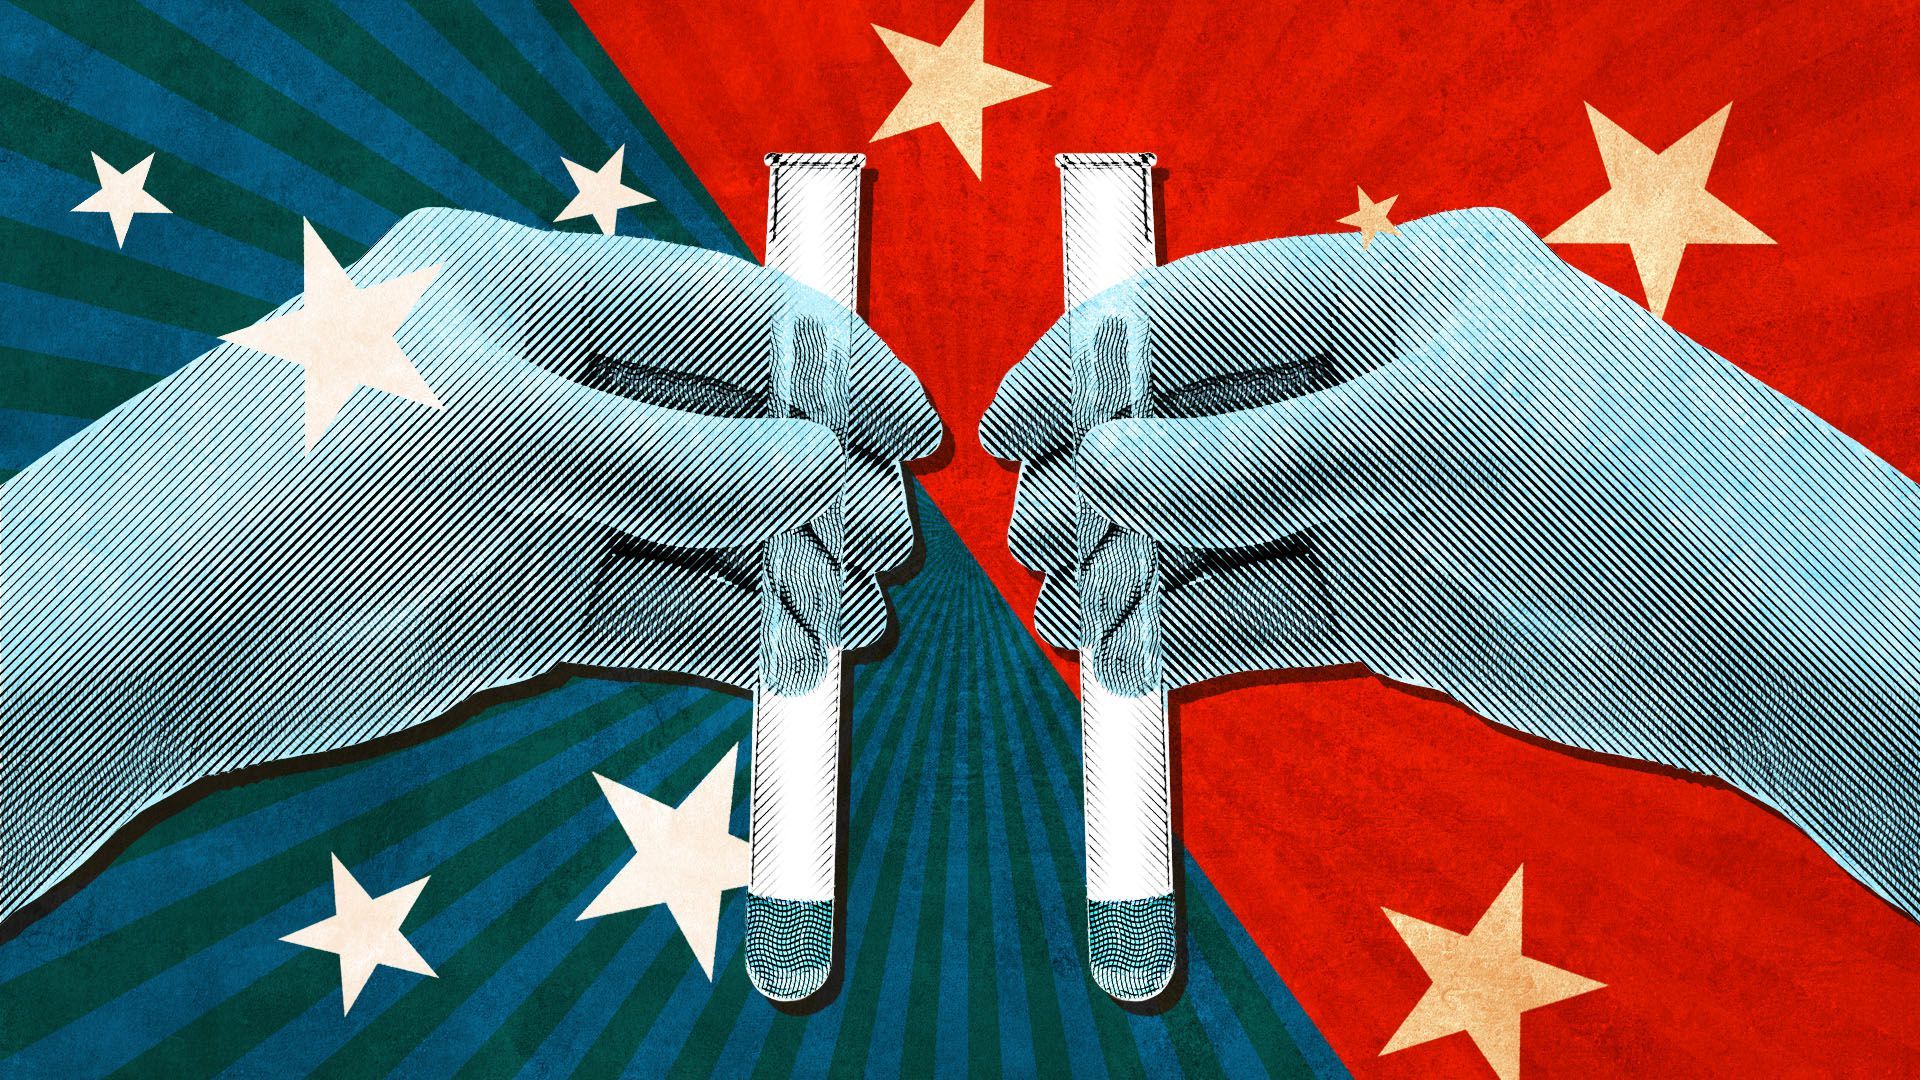 Illustration of two hands holding test tubes facing each other over a background of stripes and stars